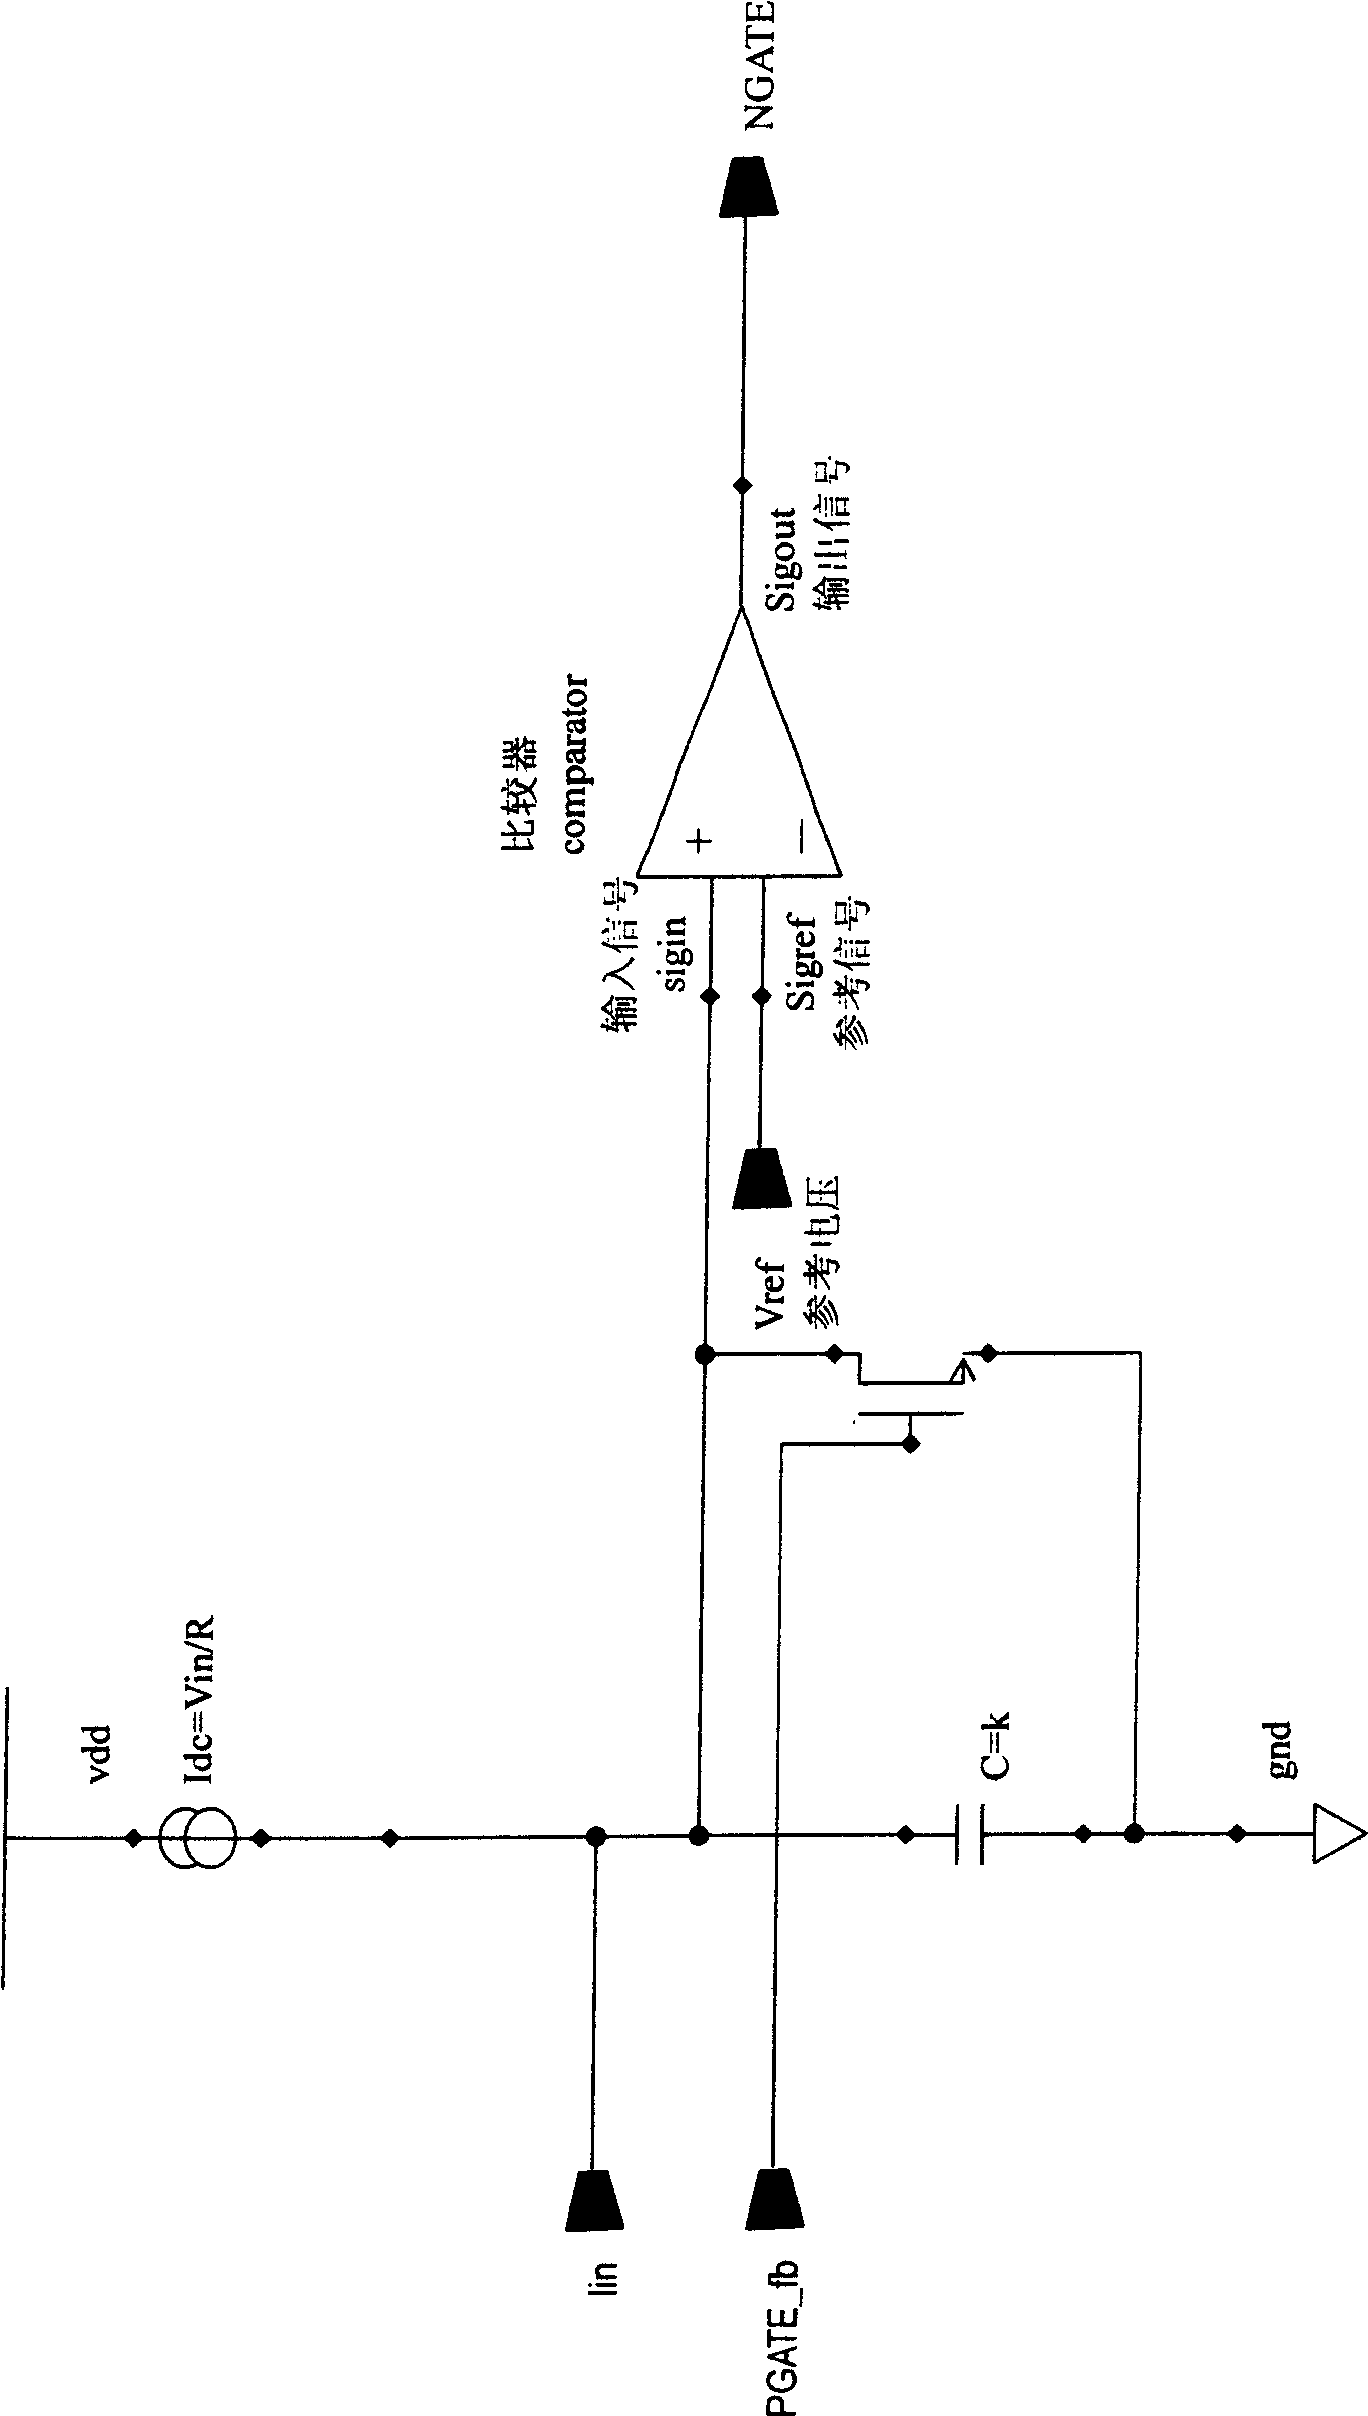 Pulse width frequency modulation mode DC/DC boosting circuit